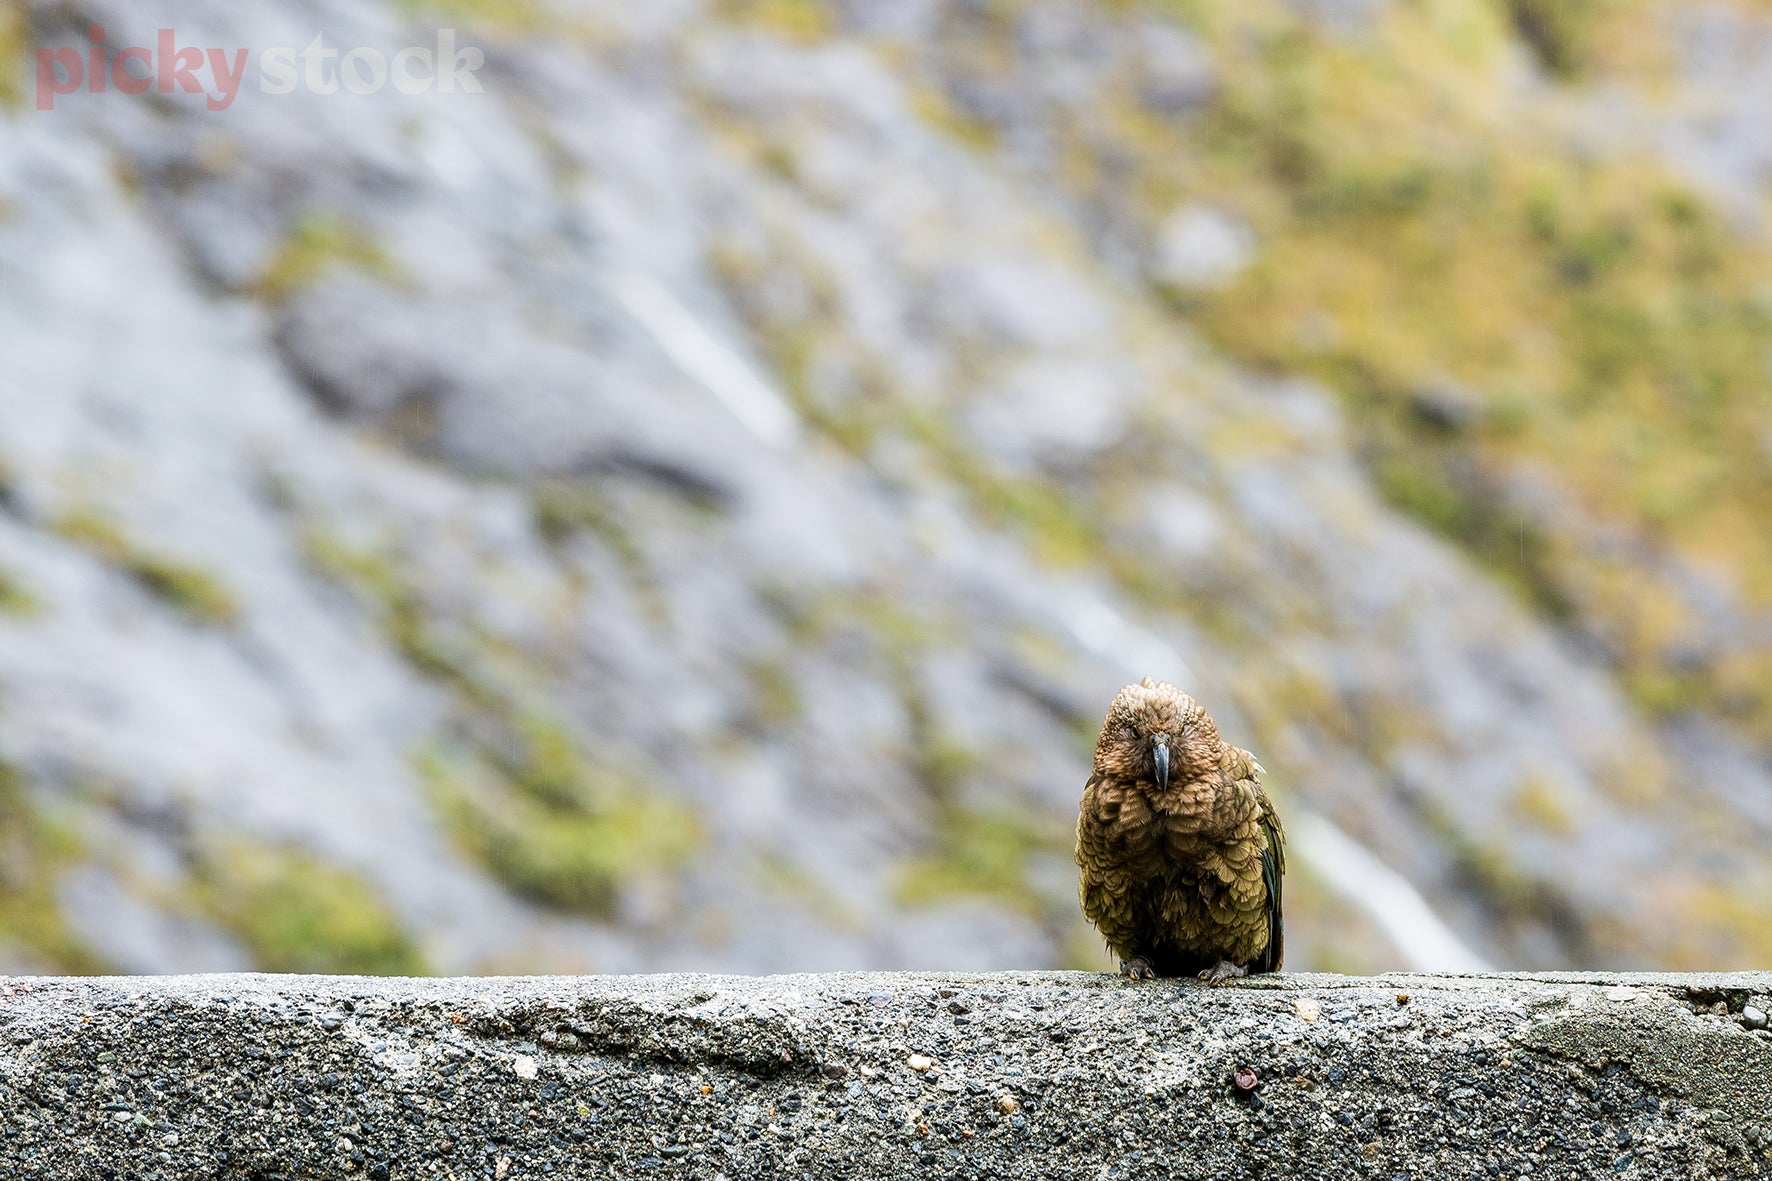 Kea standing on sandy river bank looking direclty at camera. Large rock cliff in background. 